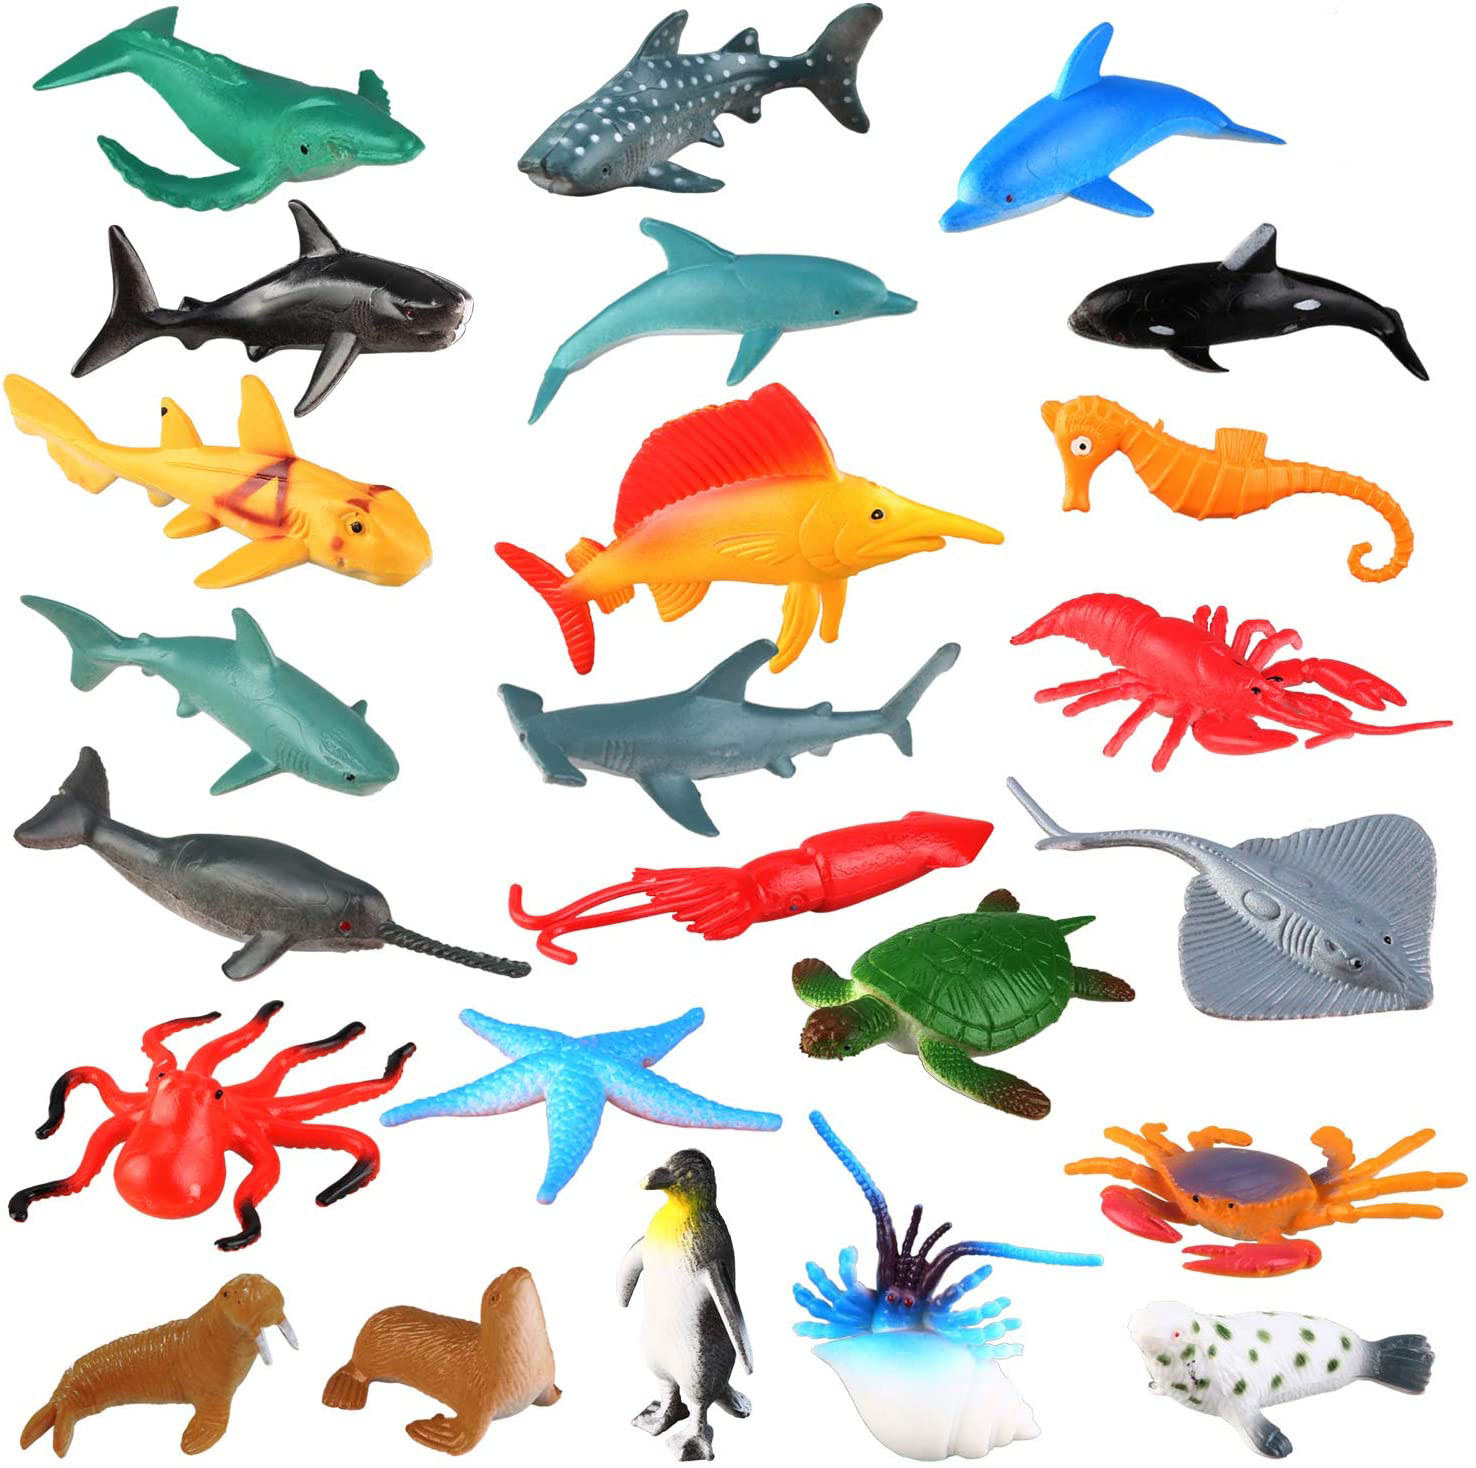 An array of brightly colored aquatic creature toys including fish, sharks, and more